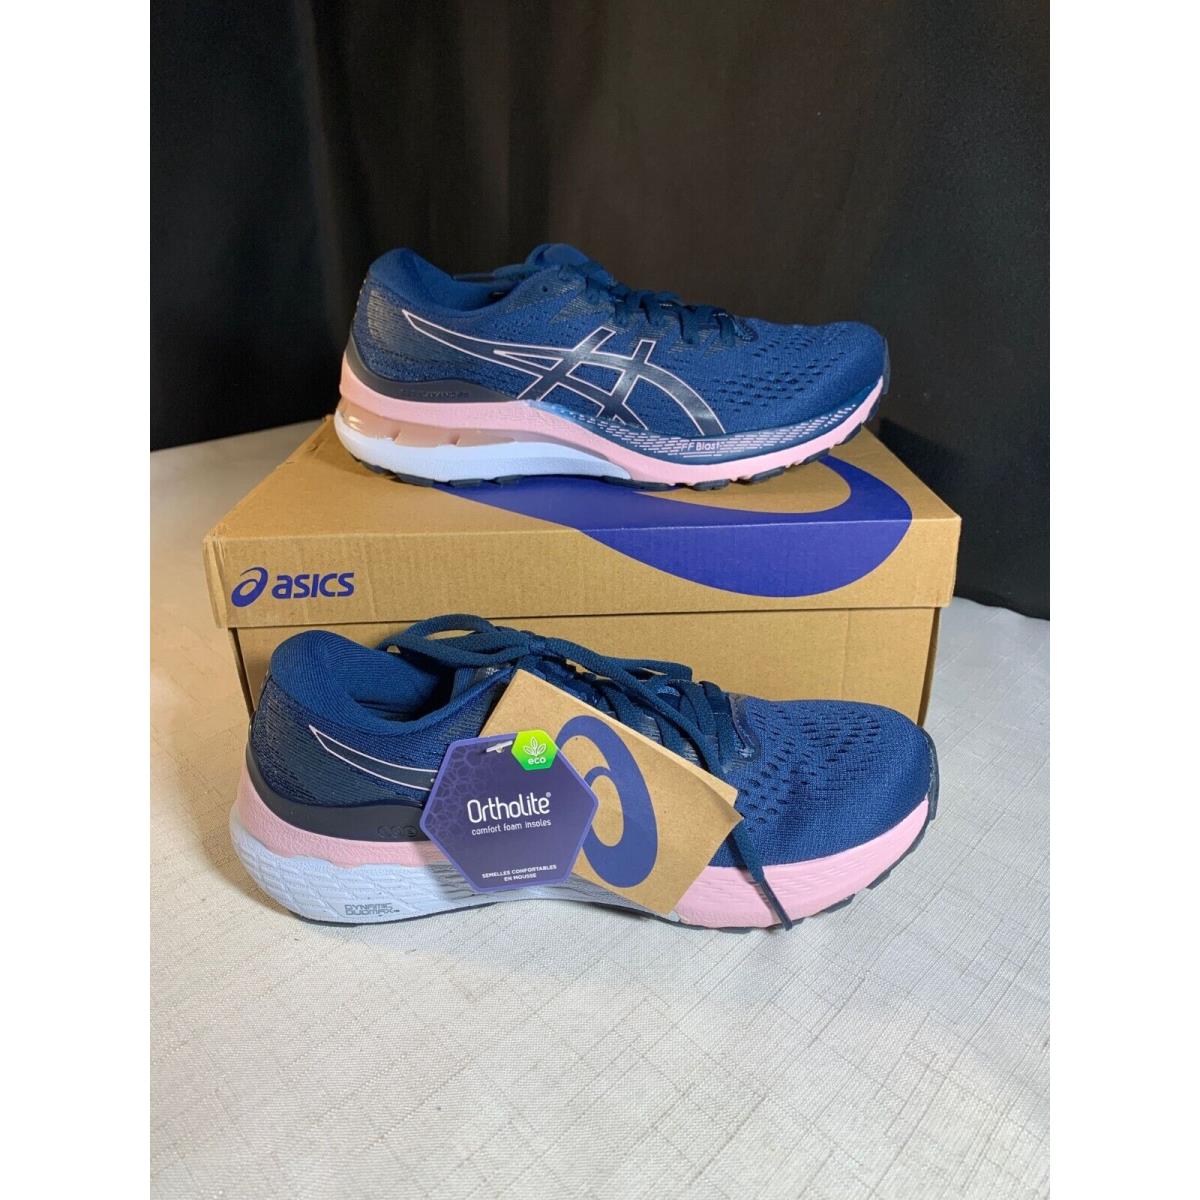 Asics Gel Kayano 28 1012B047 Womens Blue Pink Lace Up Running Shoes Size 7